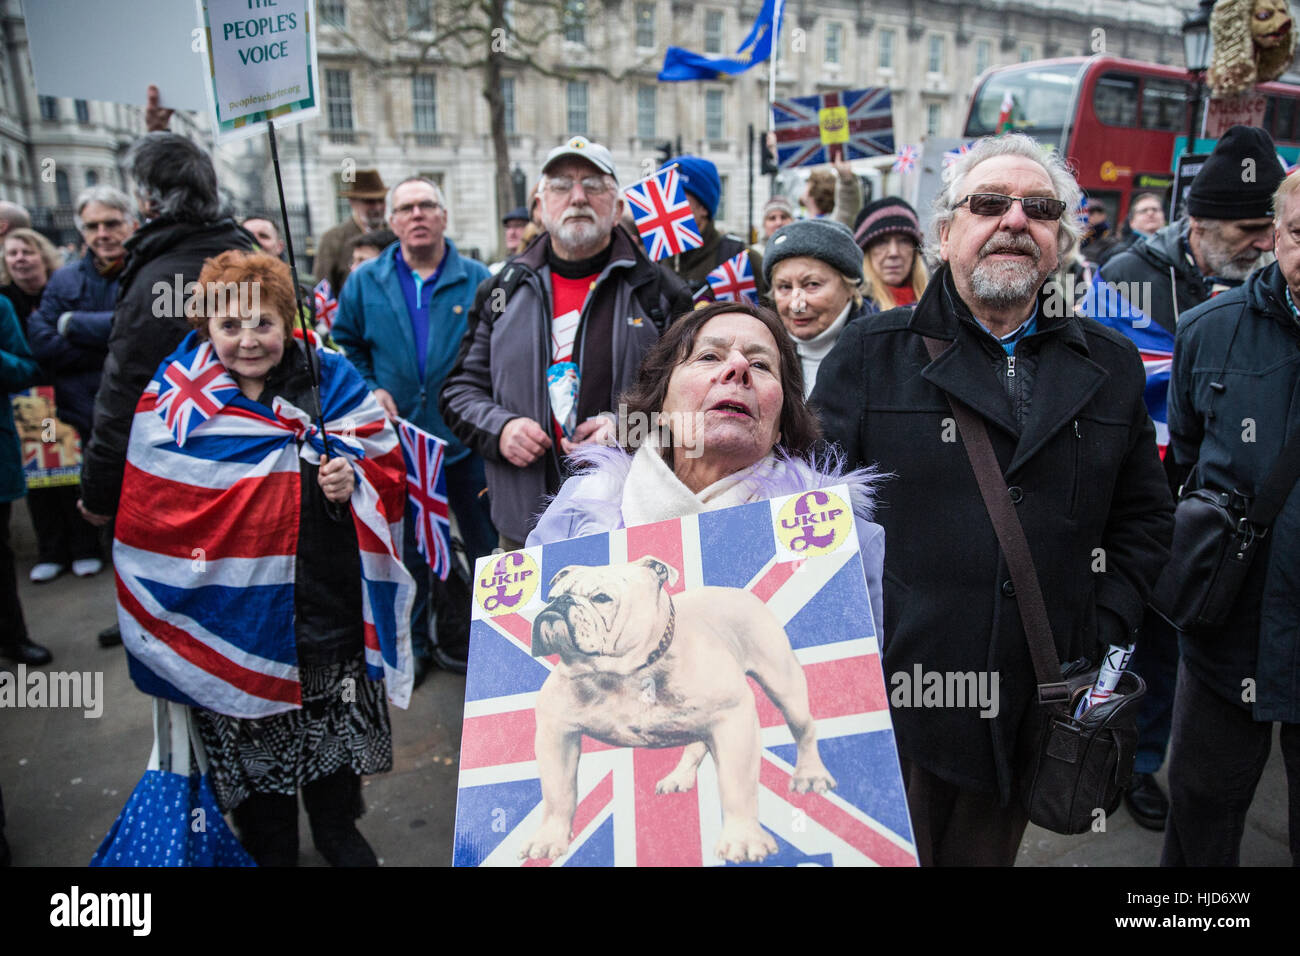 London, UK. 23rd January, 2017. Pro-Brexit campaigners attend a 'Brexit Peaceful Loud and Proud' rally organised by UKIP outside Downing Street. Campaigners intend to ensure that the EU Referendum vote is implemented. Credit: Mark Kerrison/Alamy Live News Stock Photo